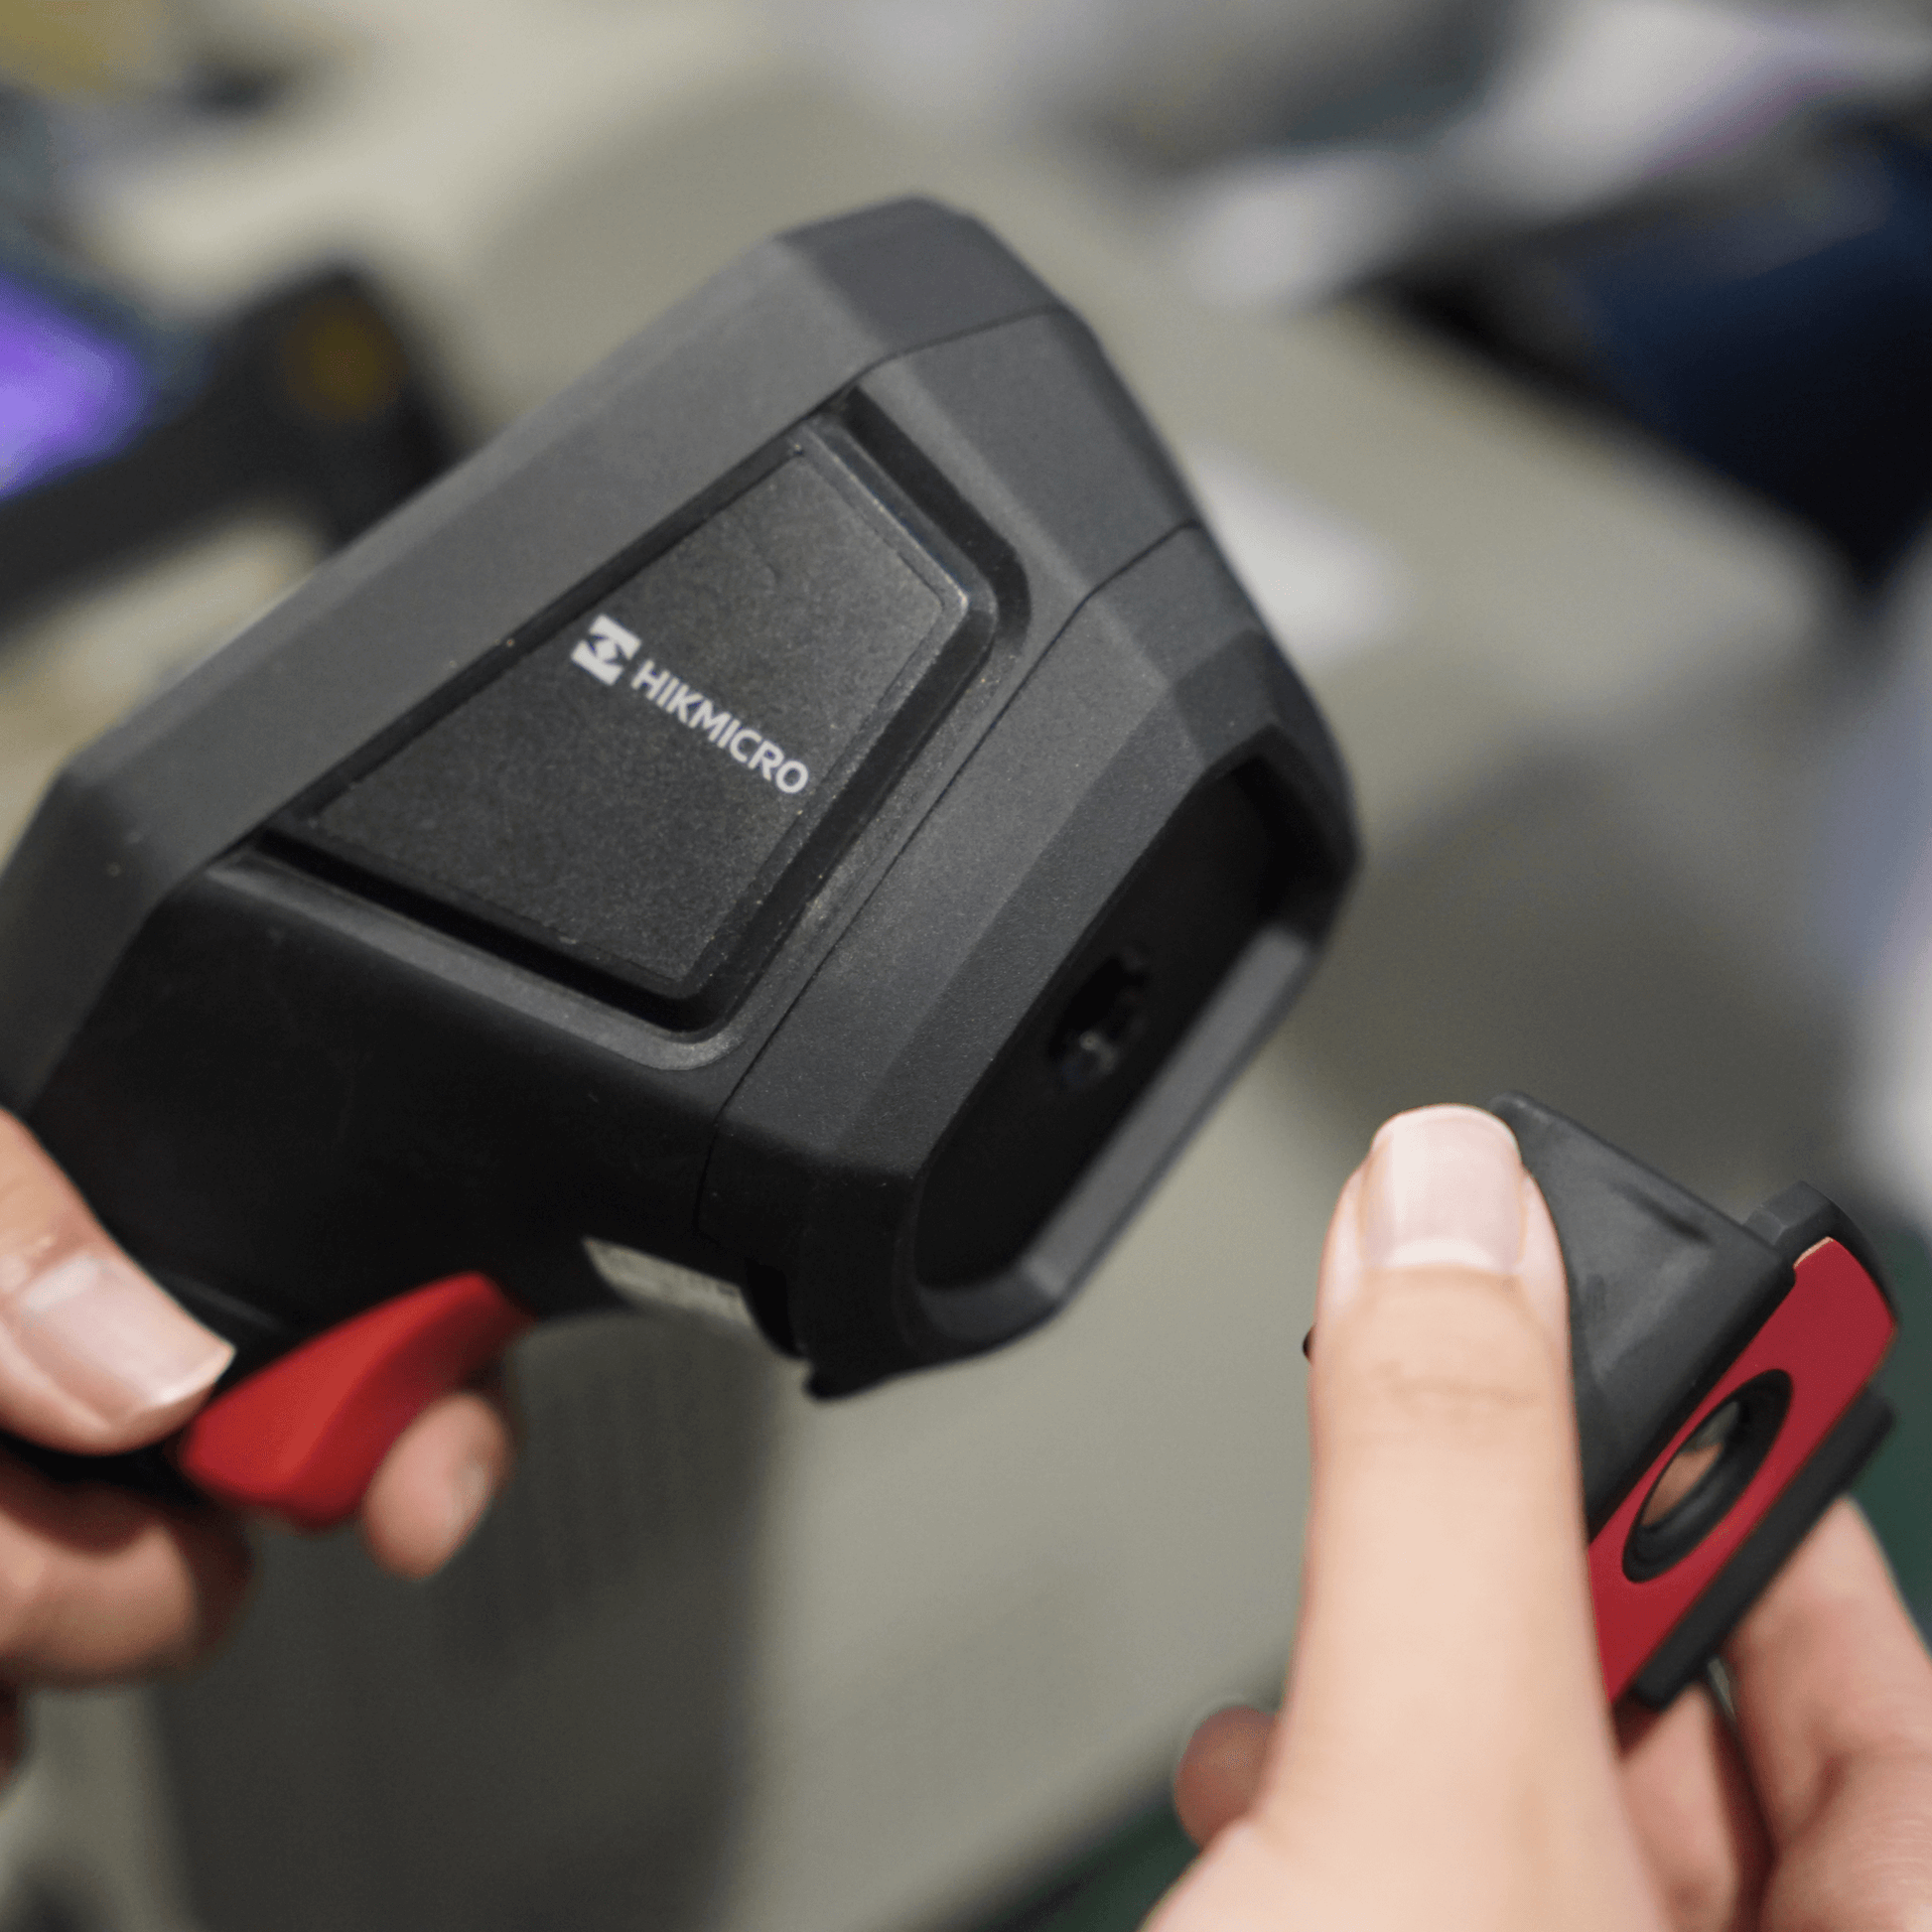 HiMicro B-Series Handheld Thermal Camera Macro Lens Being Fitted to Handheld Thermal Imager